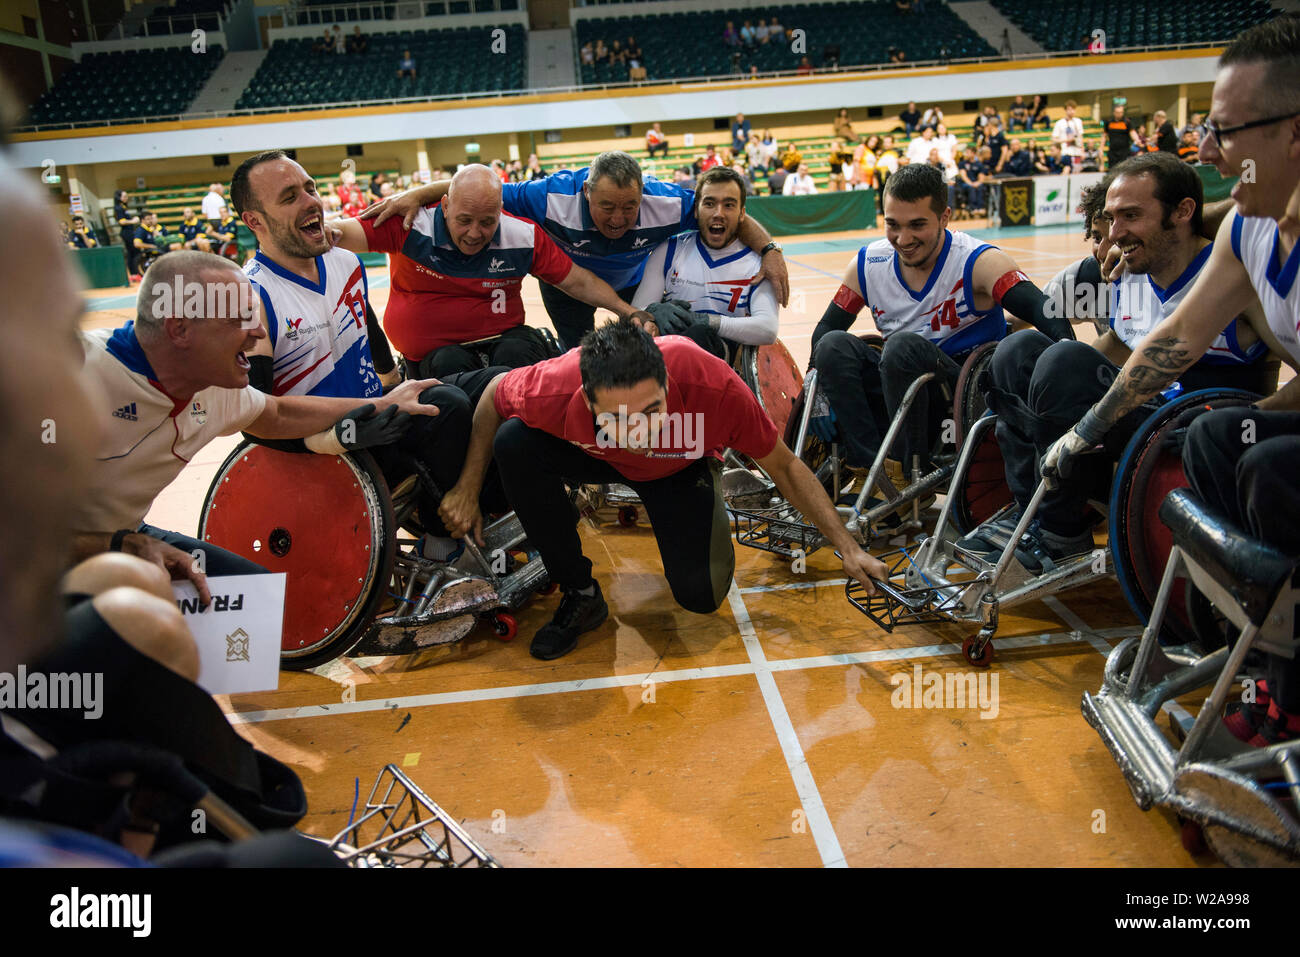 French players shout and sing after they won the game.The French National Team beat the Germans, 42:47 during the final and won the Metro Cup for the second time. The Metro Cup is the largest international Wheelchair Rugby Tournament in Poland. On 4-6 July 2019, the seventh edition of this event was held at the Ursynów Arena in Warsaw. Wheelchair rugby is a Paralympic sports discipline for people with spinal cord injury in the cervical segment and people with leg disorders. Stock Photo